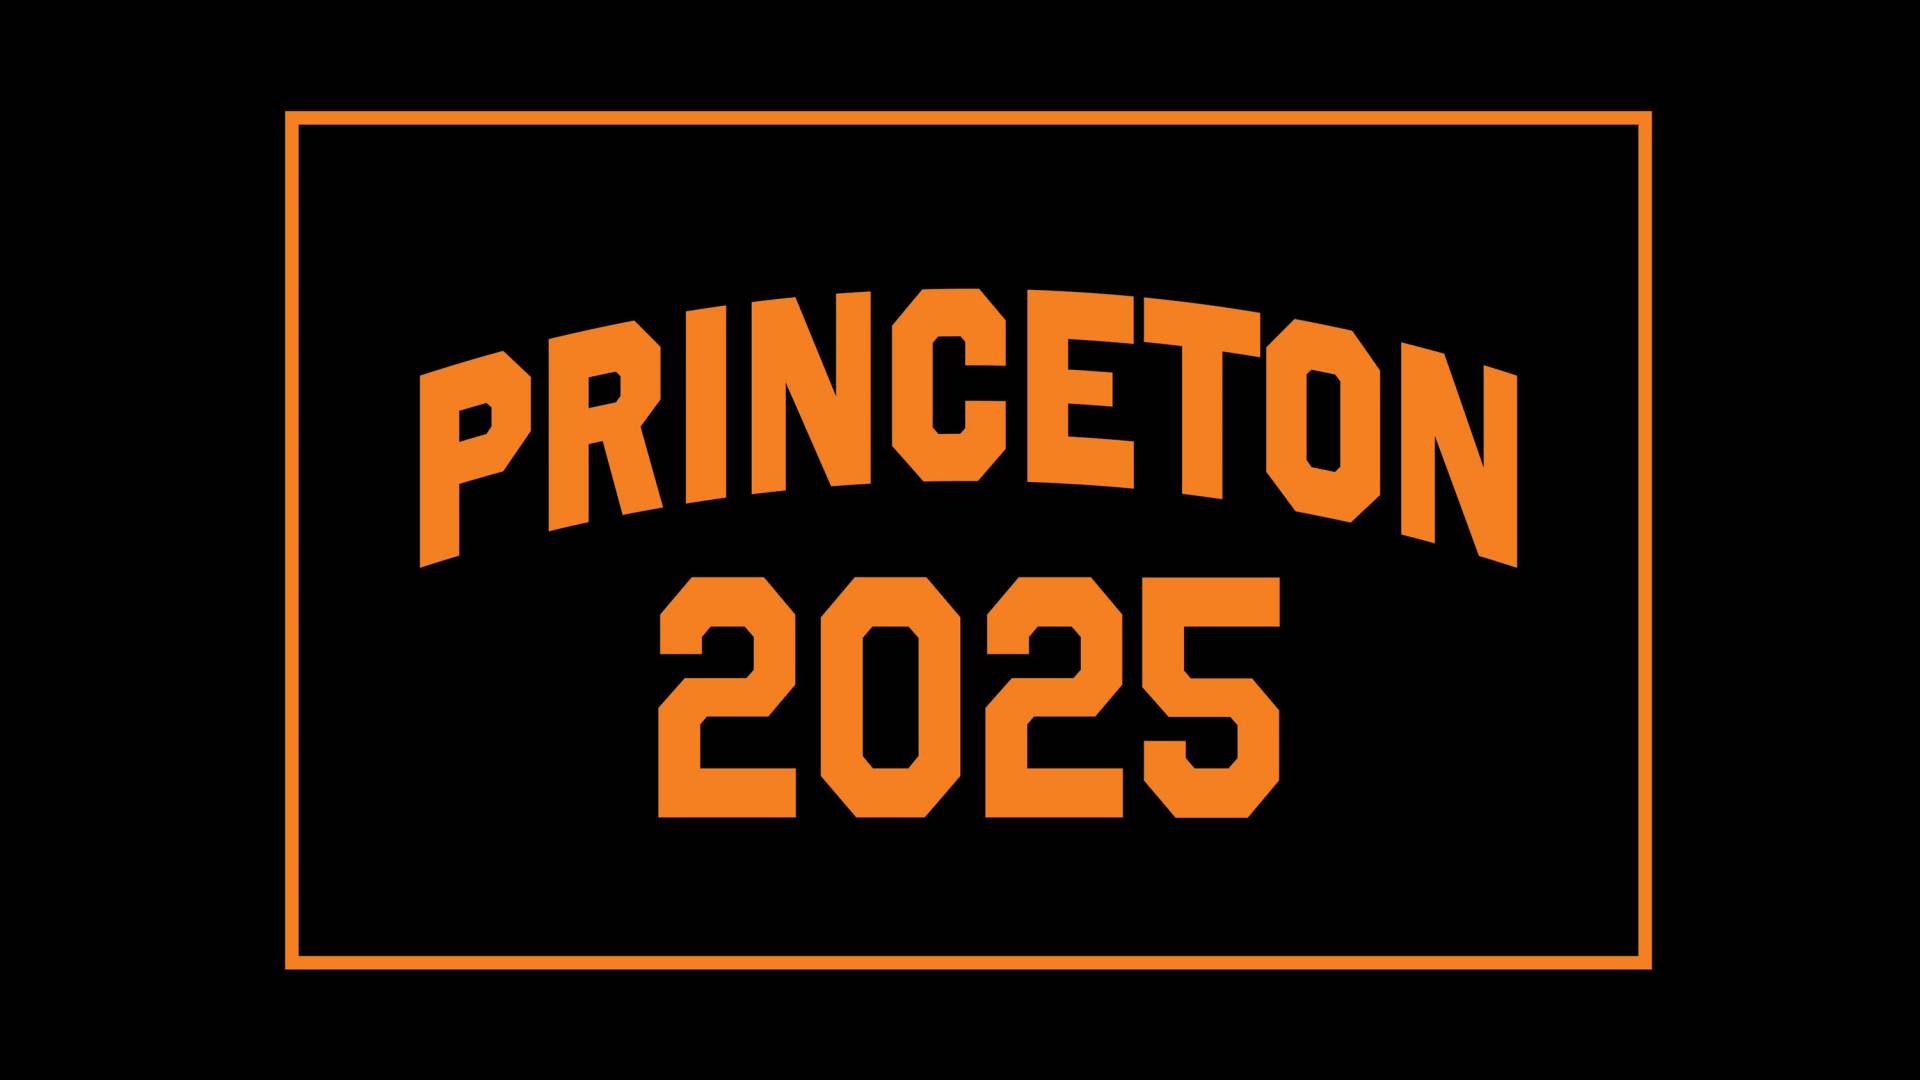 Princeton’s Class of 2025 arrives from around the globe, embracing